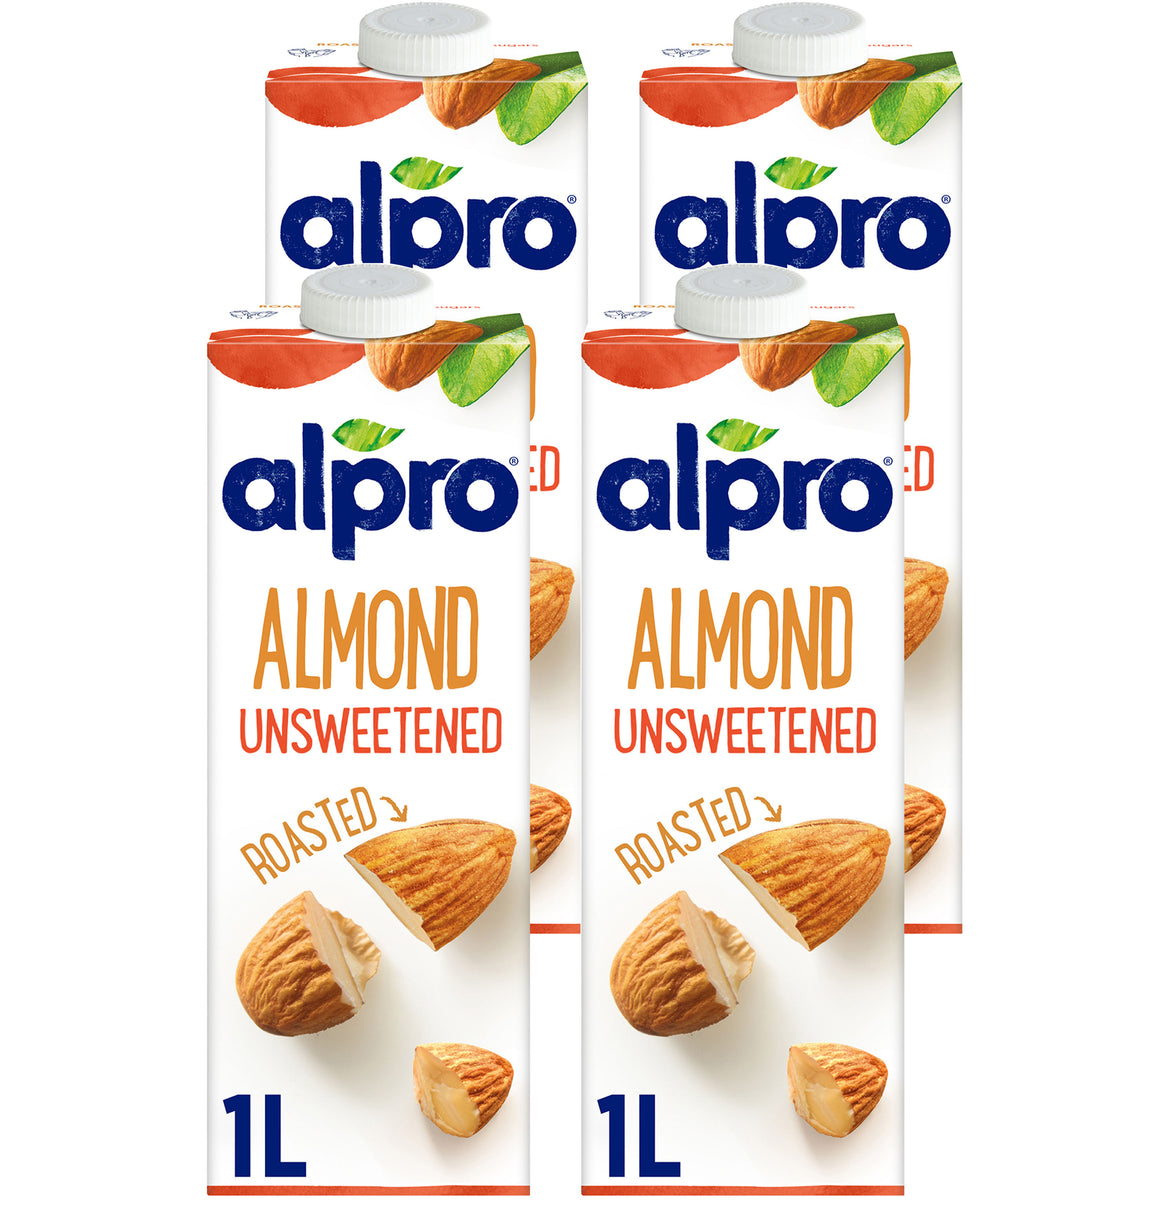 Alpro Almond Unsweetened Drink 1L, (Pack of 4) 100% Plant Based And Dairy Free, Suitable For Vegans, Naturally Free From Lactose, Rich In Nutrients